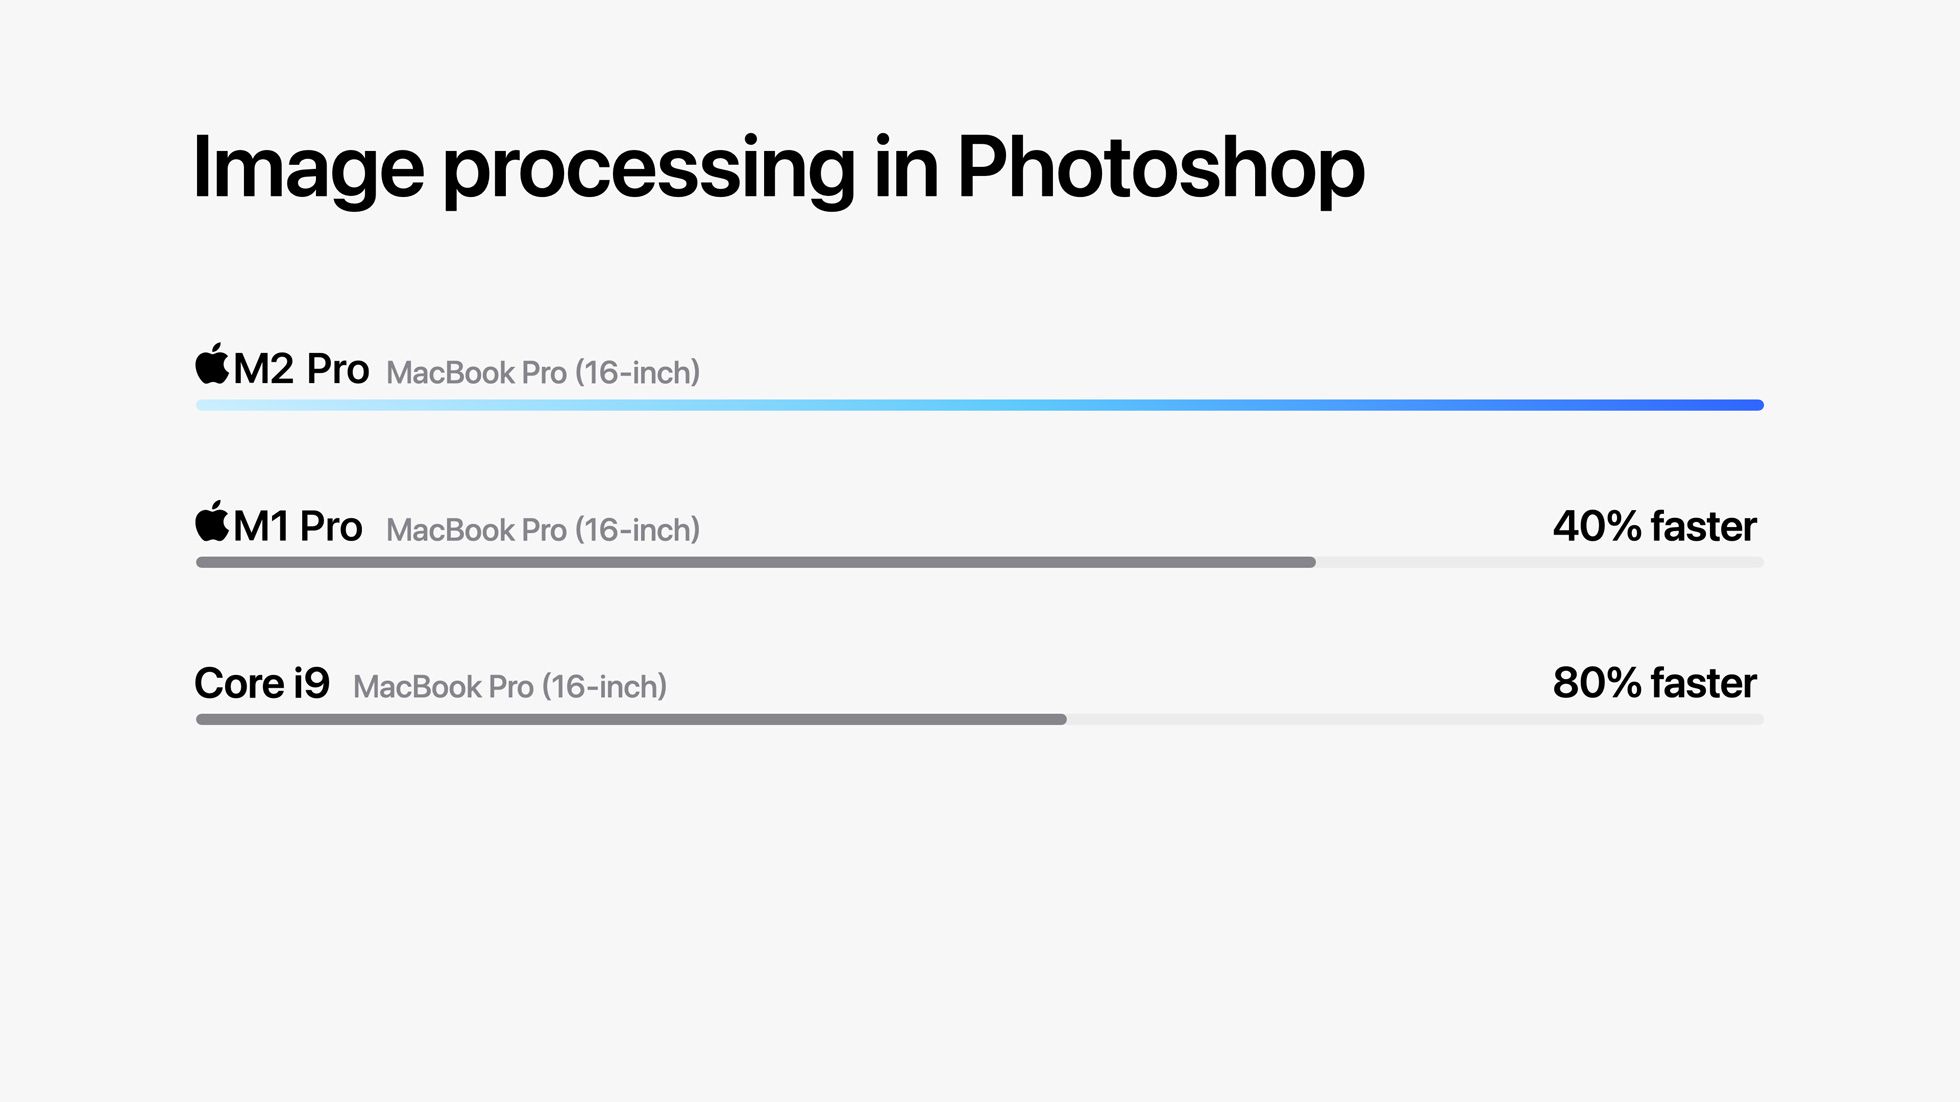 Graph showing Image processing in Photoshop performance on M2 Pro as 40% faster than M1 Pro and 80% faster than the Core i9 in the 16-inch MacBook Pro